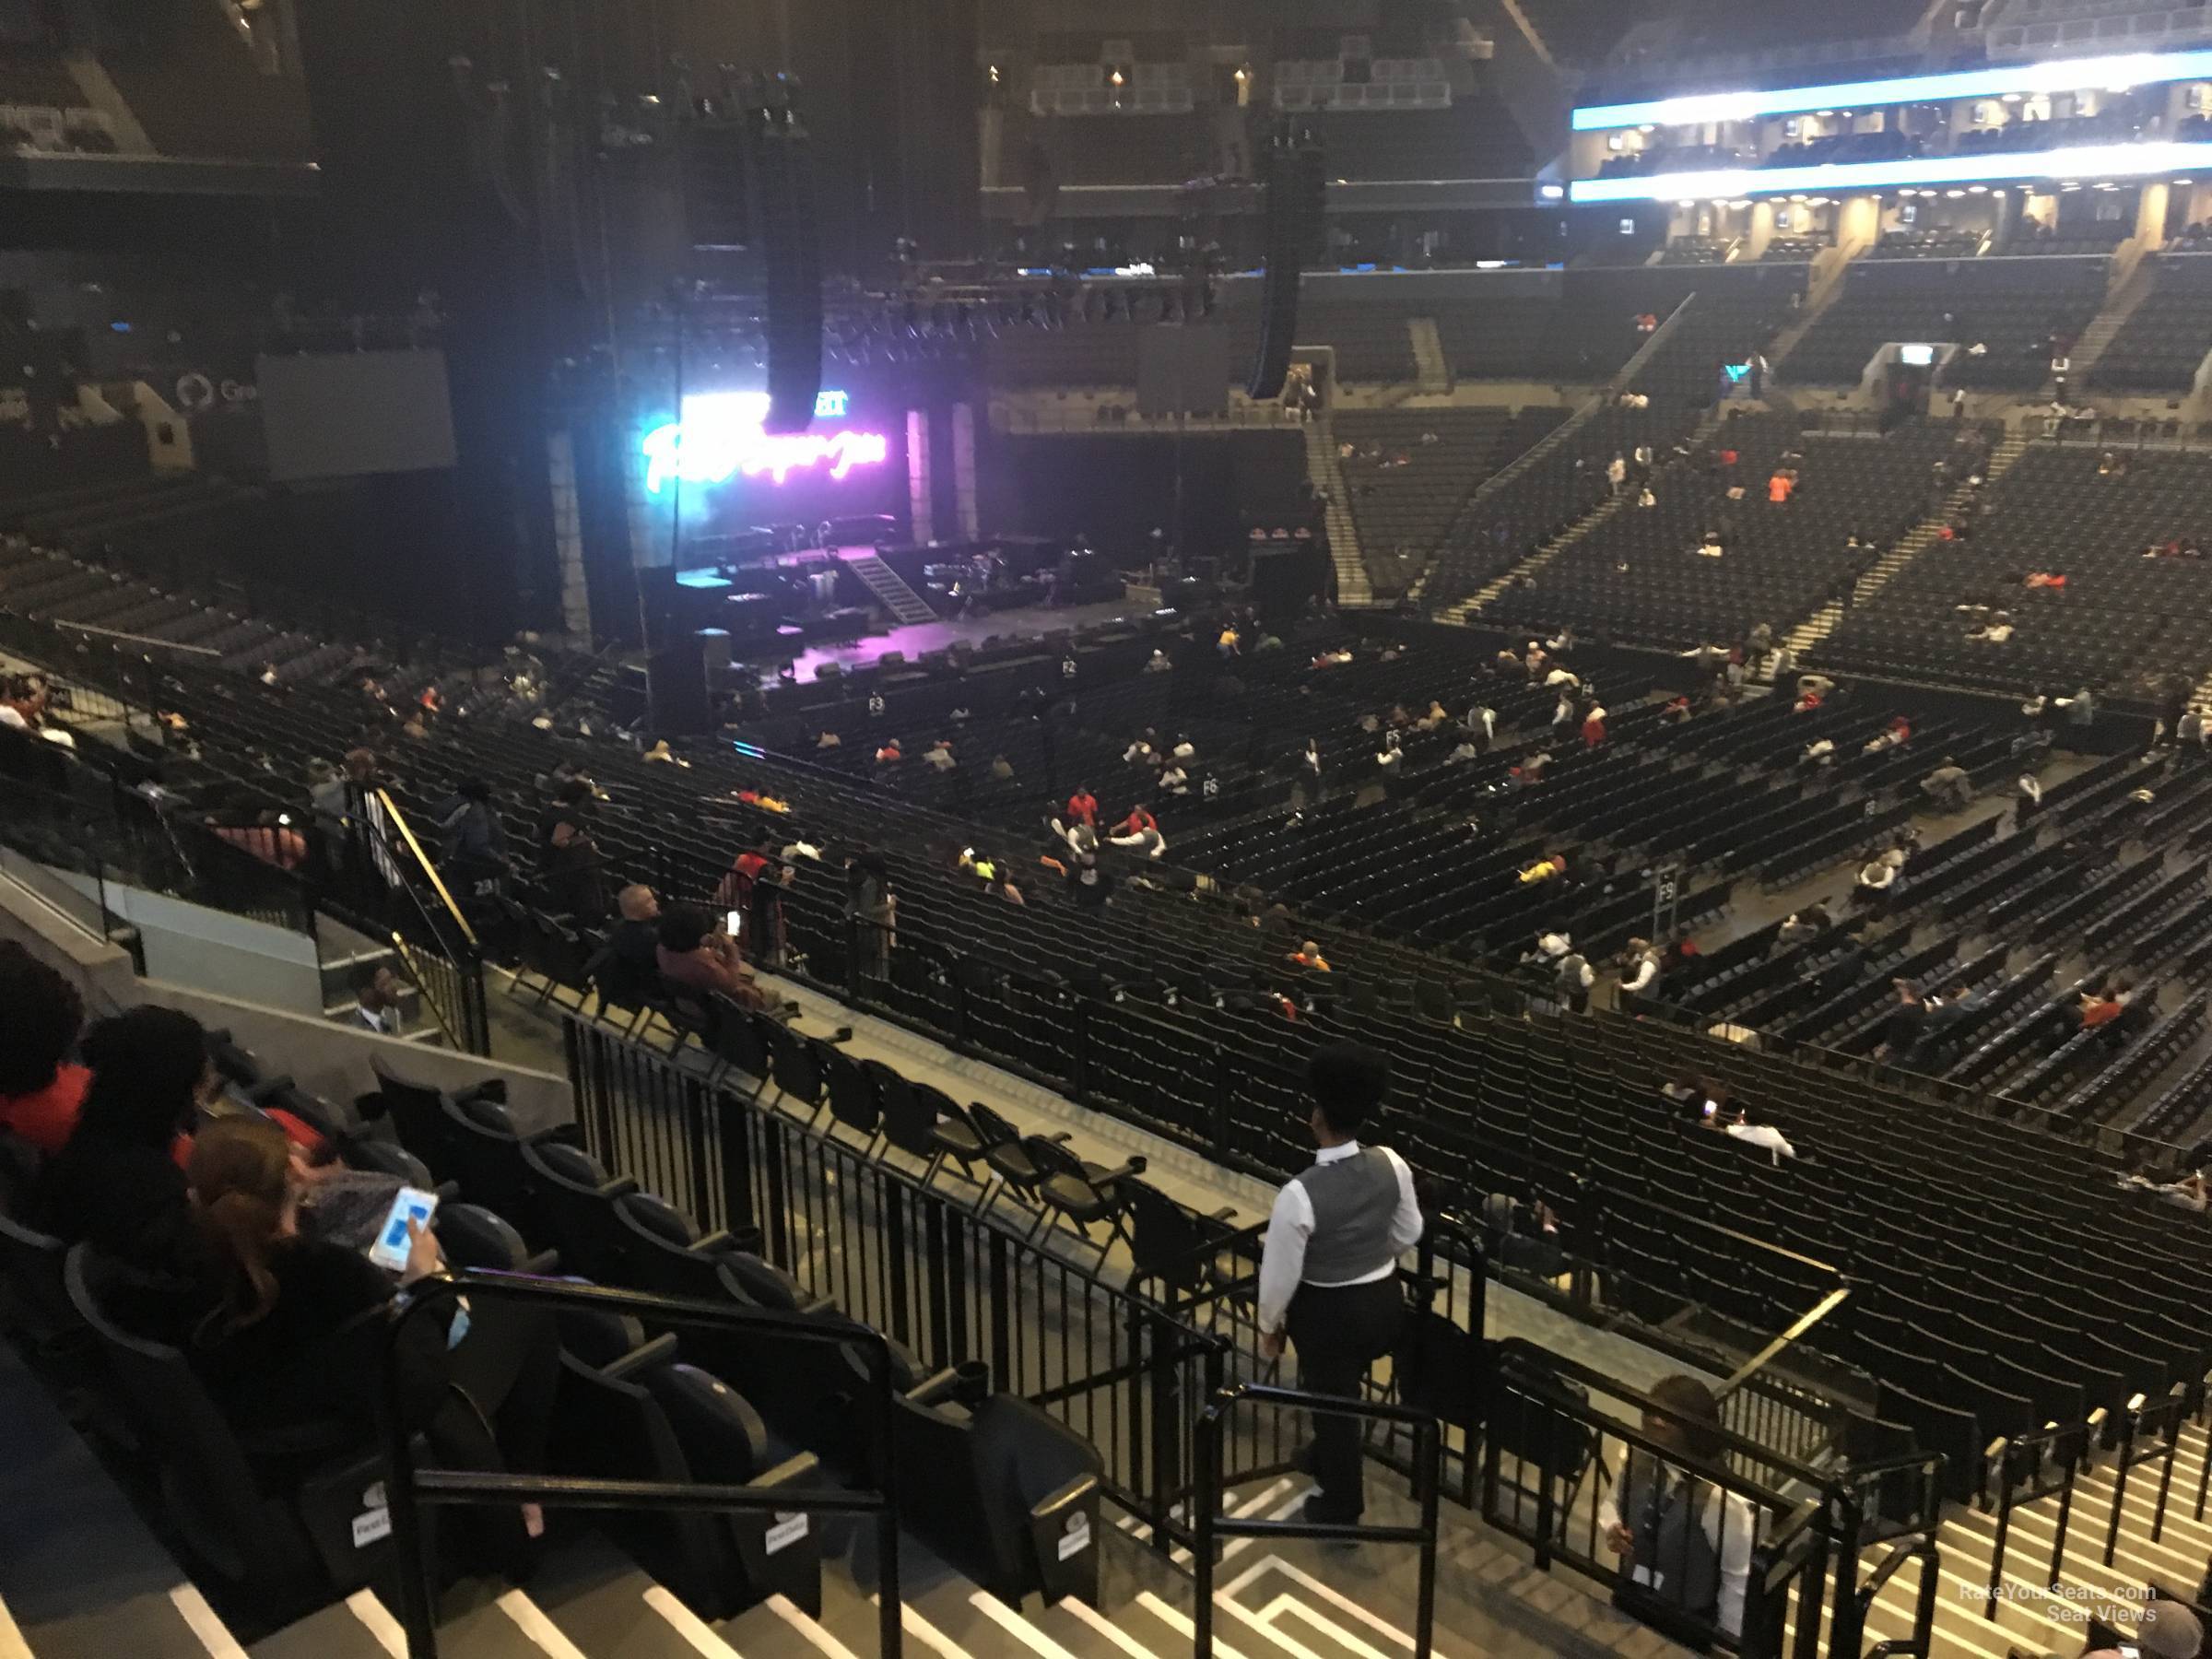 section 122, row 6 seat view  for concert - barclays center